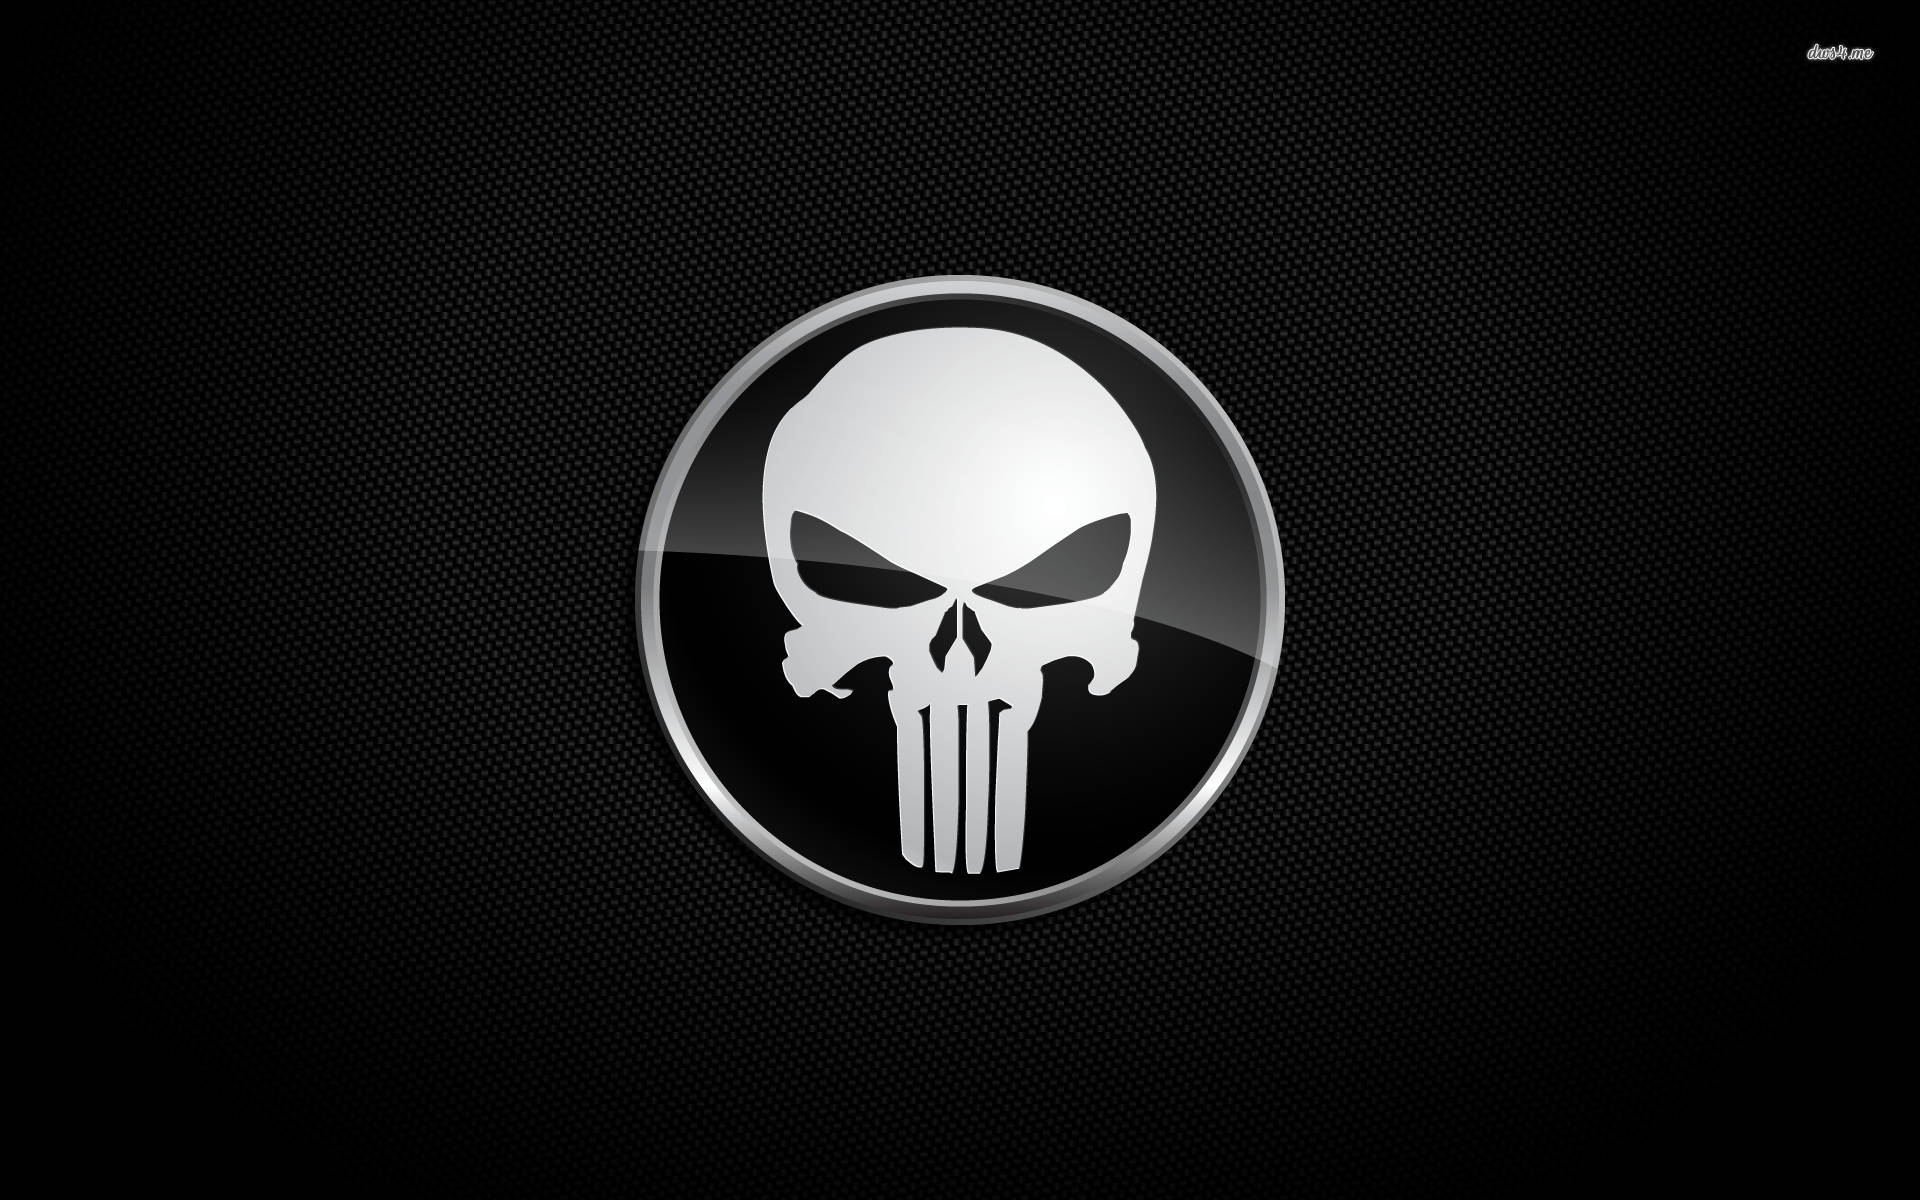 Punisher Comic Book Character Logo Background